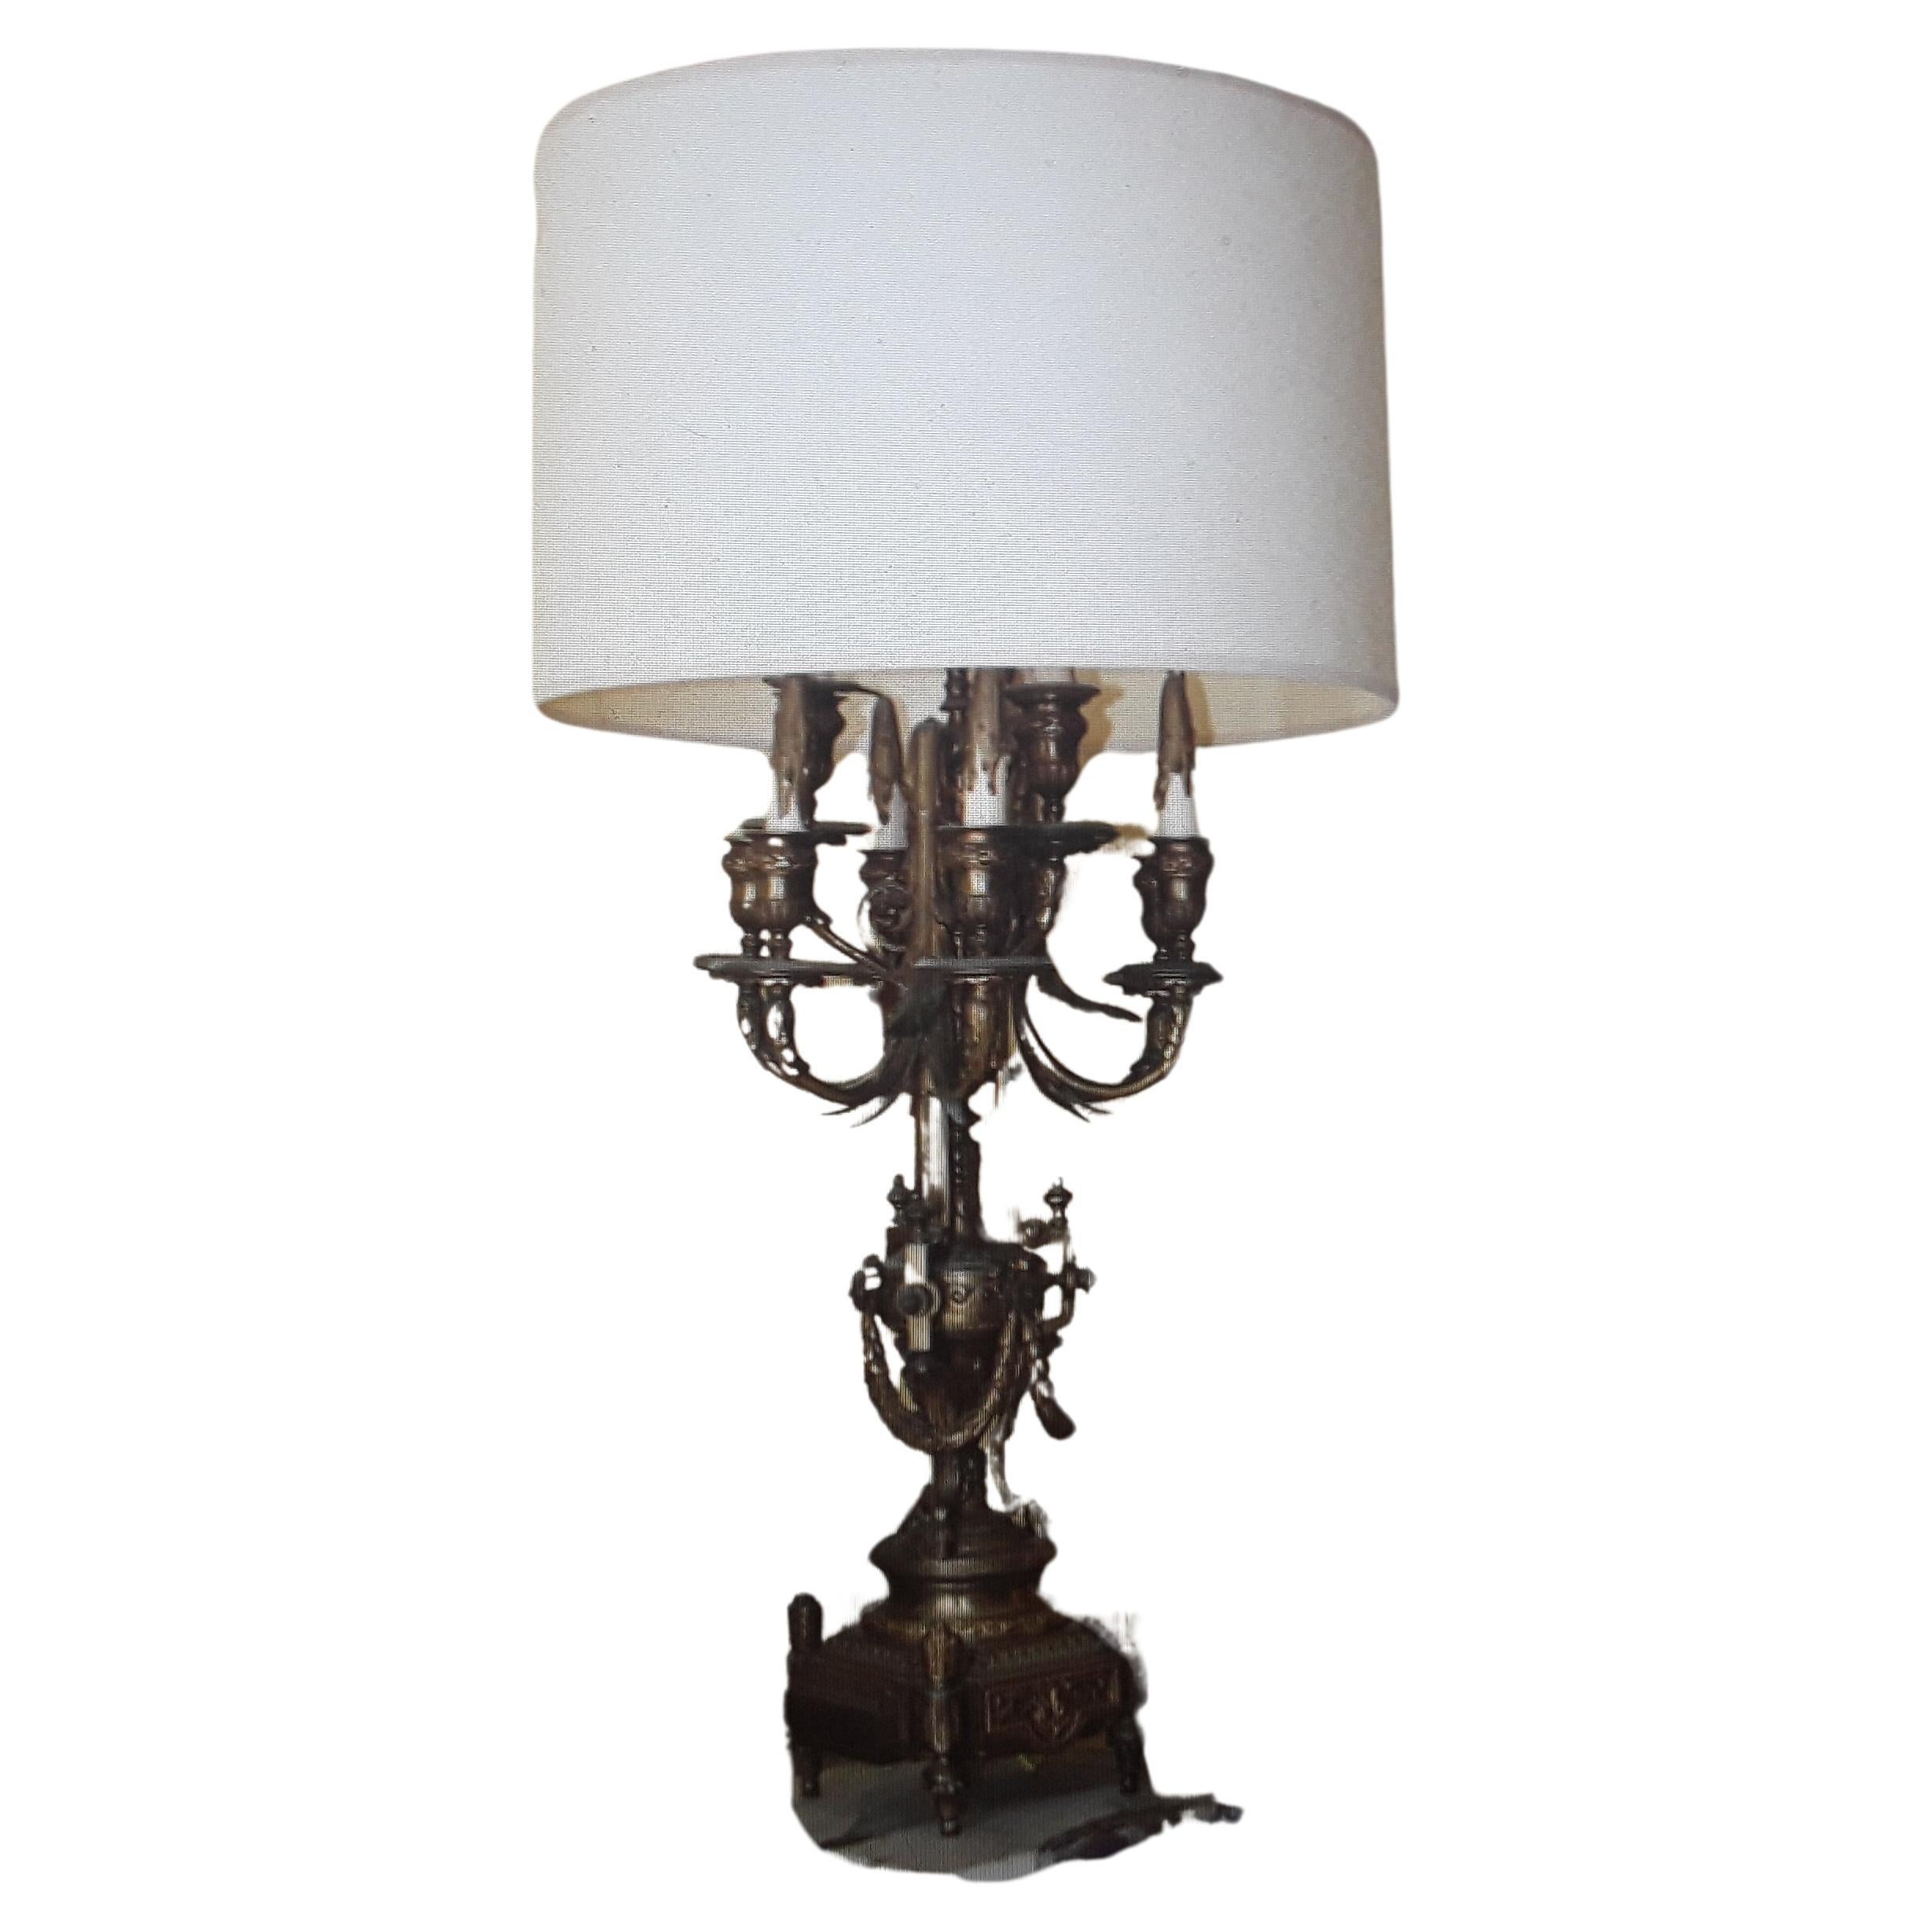 c1880 French Neoclassical style 8 Light Table Lamp. This is a large, grand scale Gilt Bronze Lamp.Please look closely at pictures as they show the details. 7 out of 8 wood faux candles included. I would change the shade.